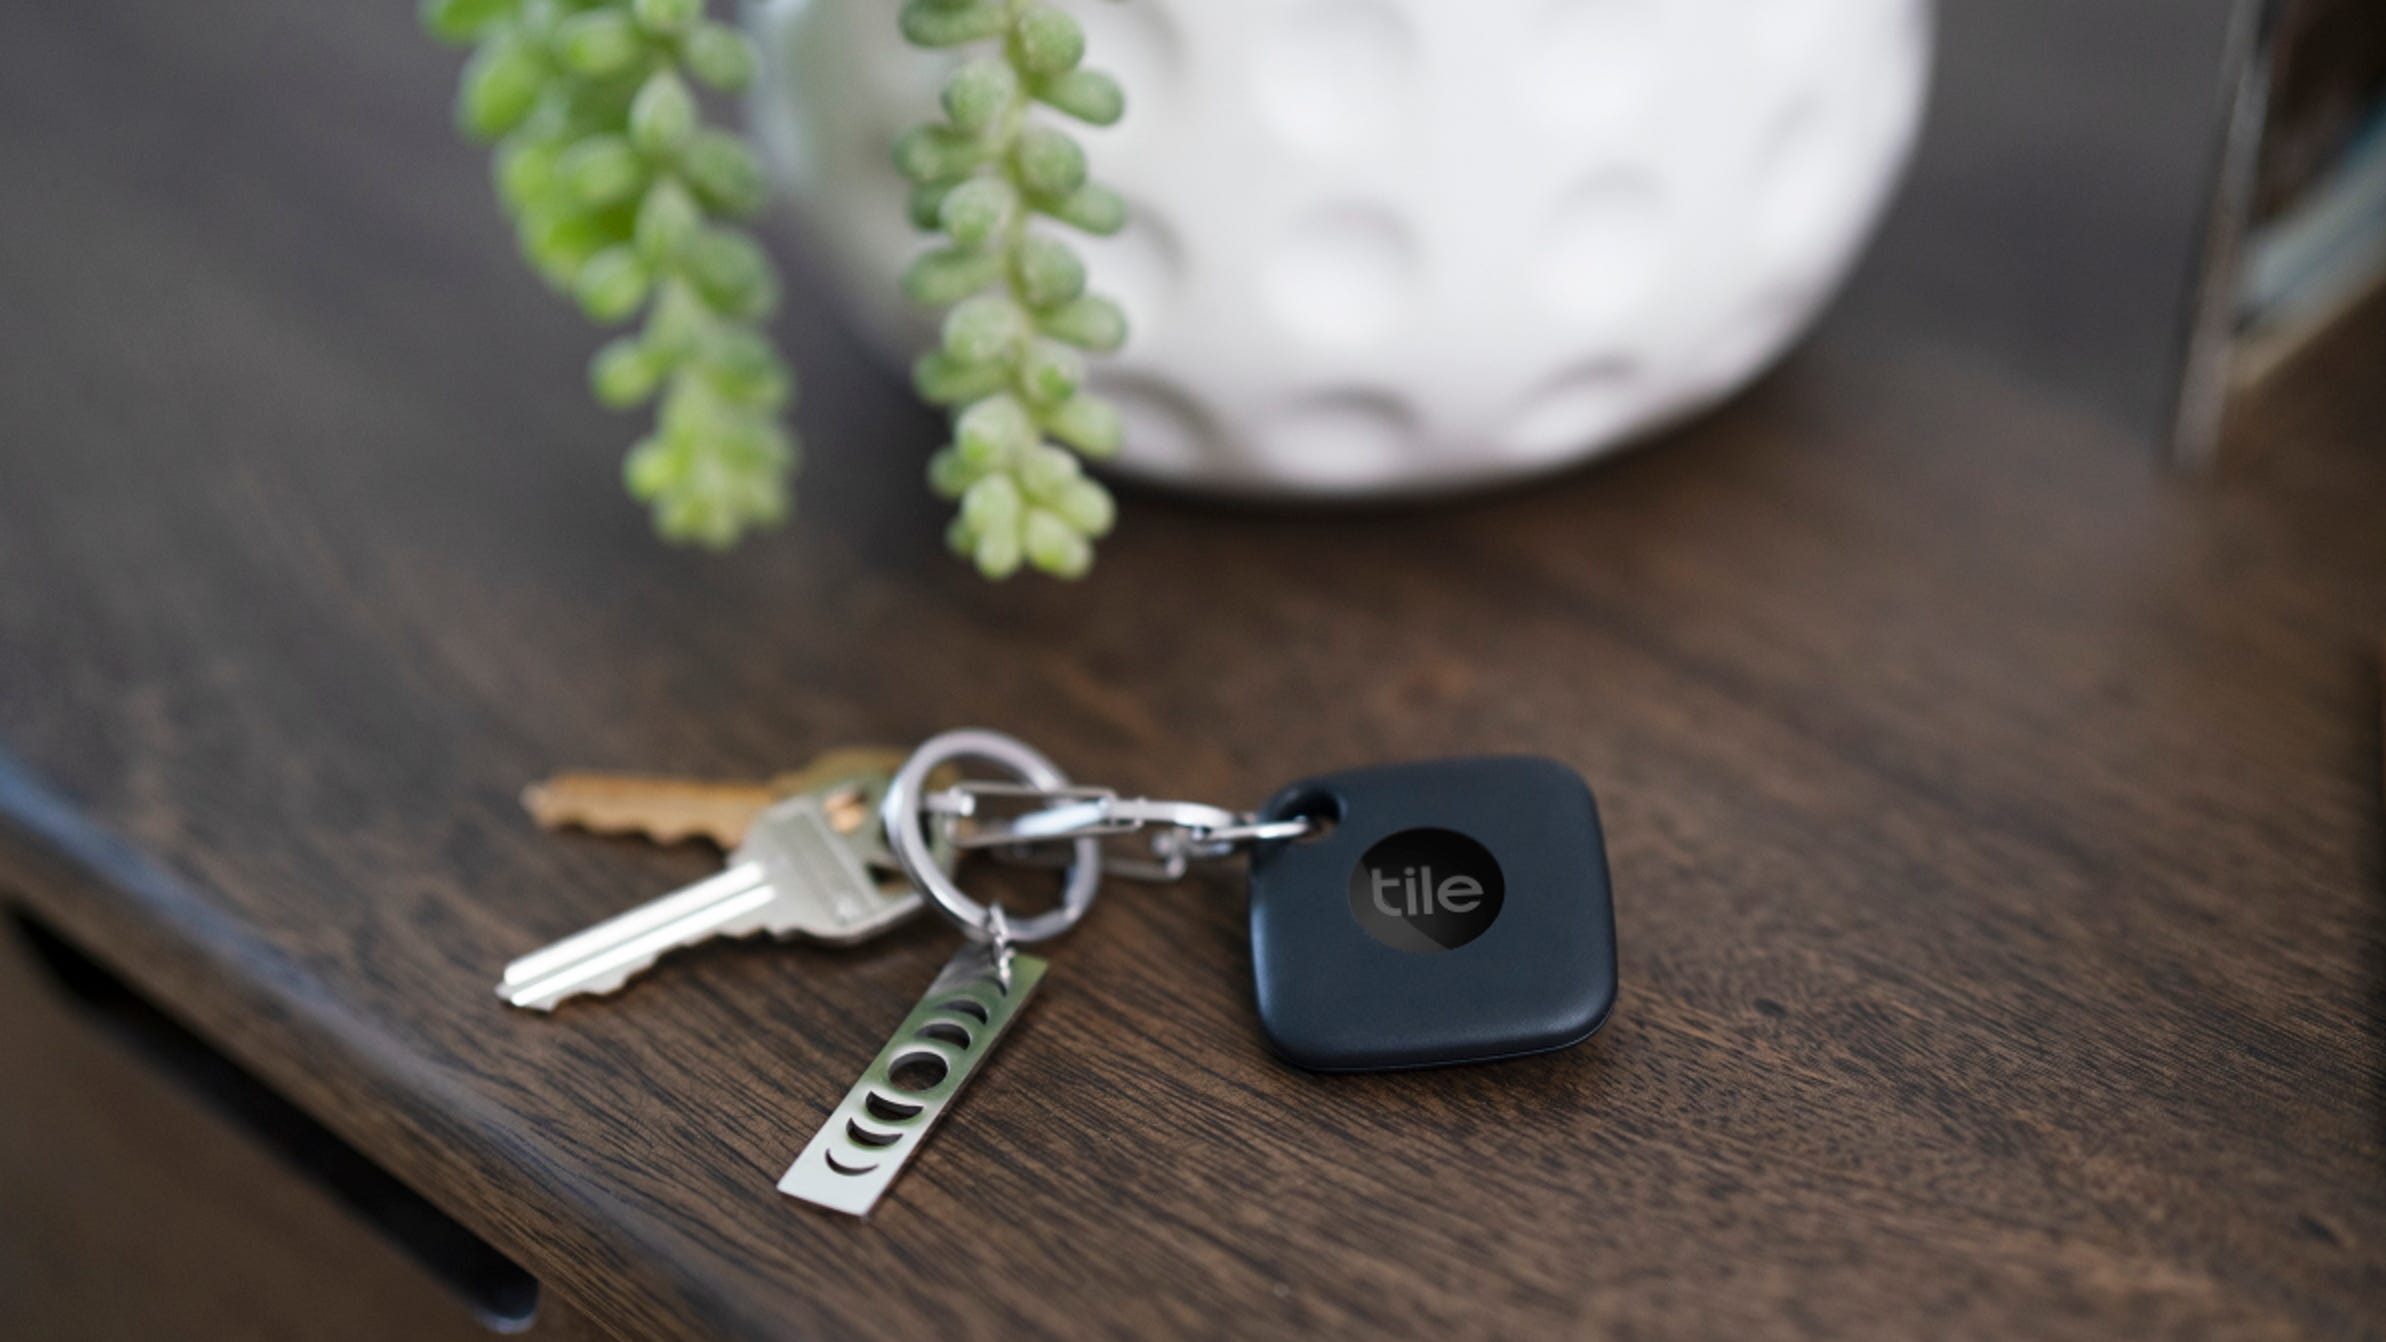 Life360 acquired Tile – a tracking device company